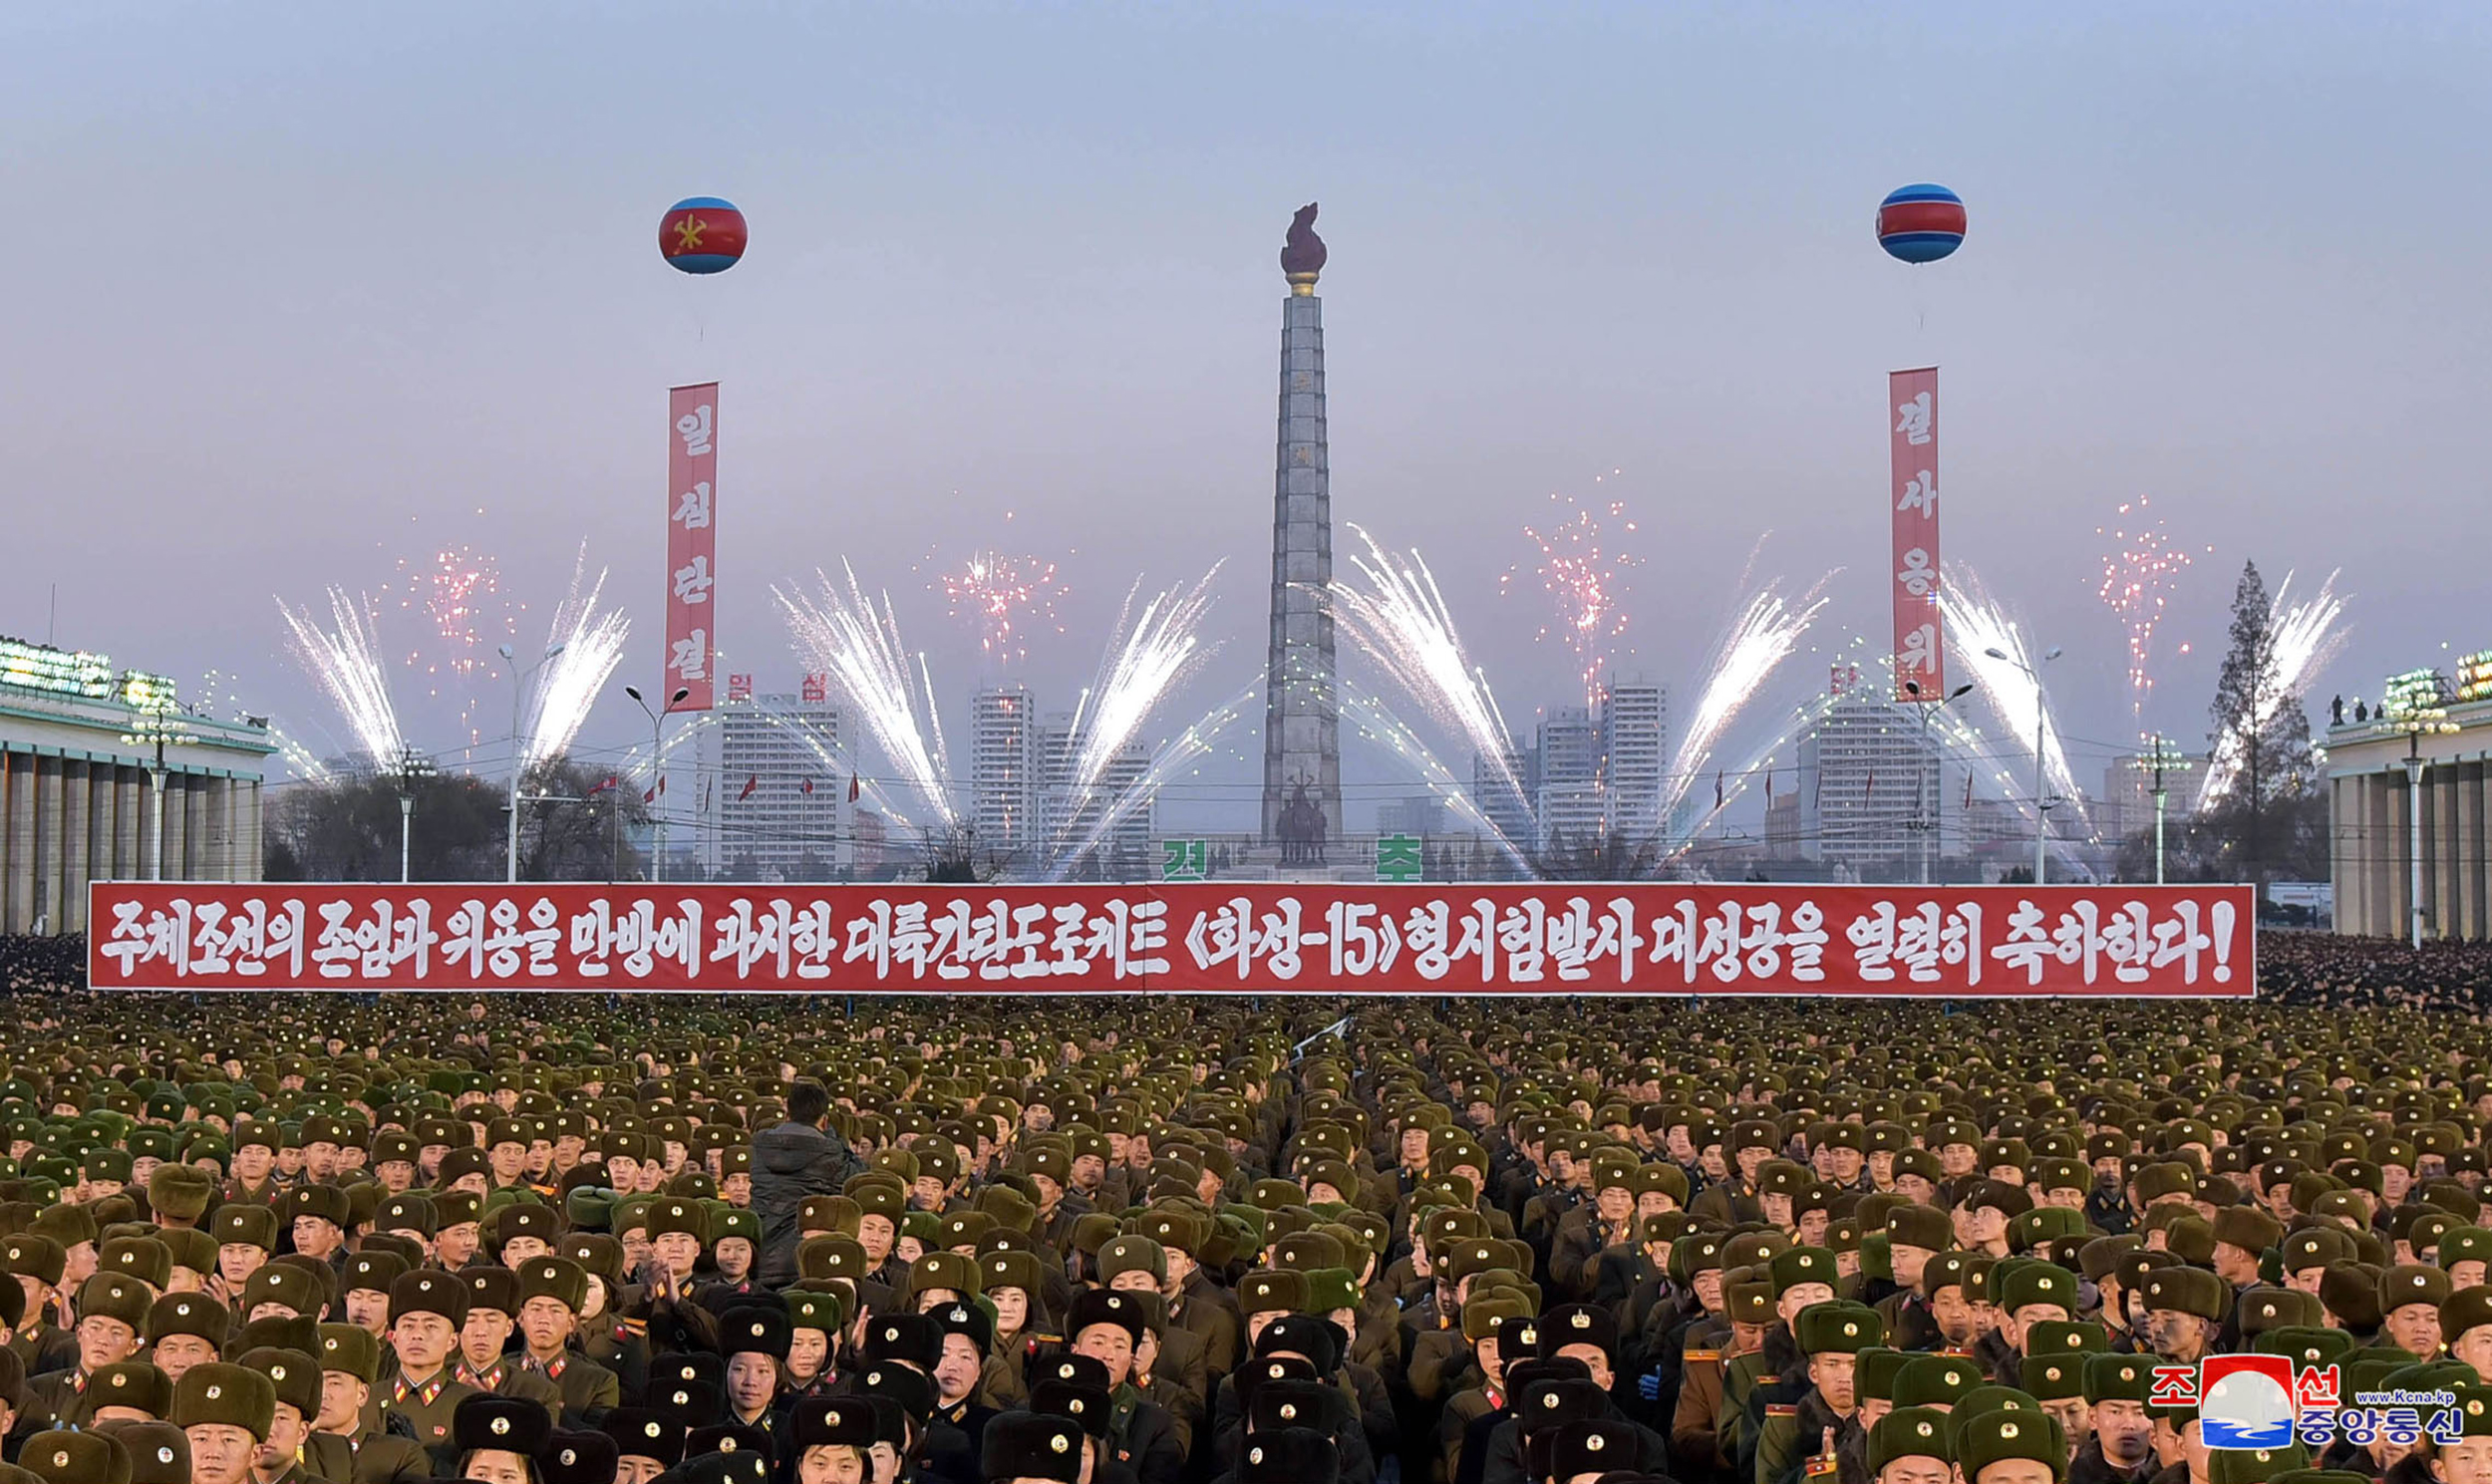 This picture released by North Korea's official Korean Central News Agency on Dec. 2, 2017 shows North Korean soldiers and residents holding a rally in Pyongyang. (AFP/Getty Images)